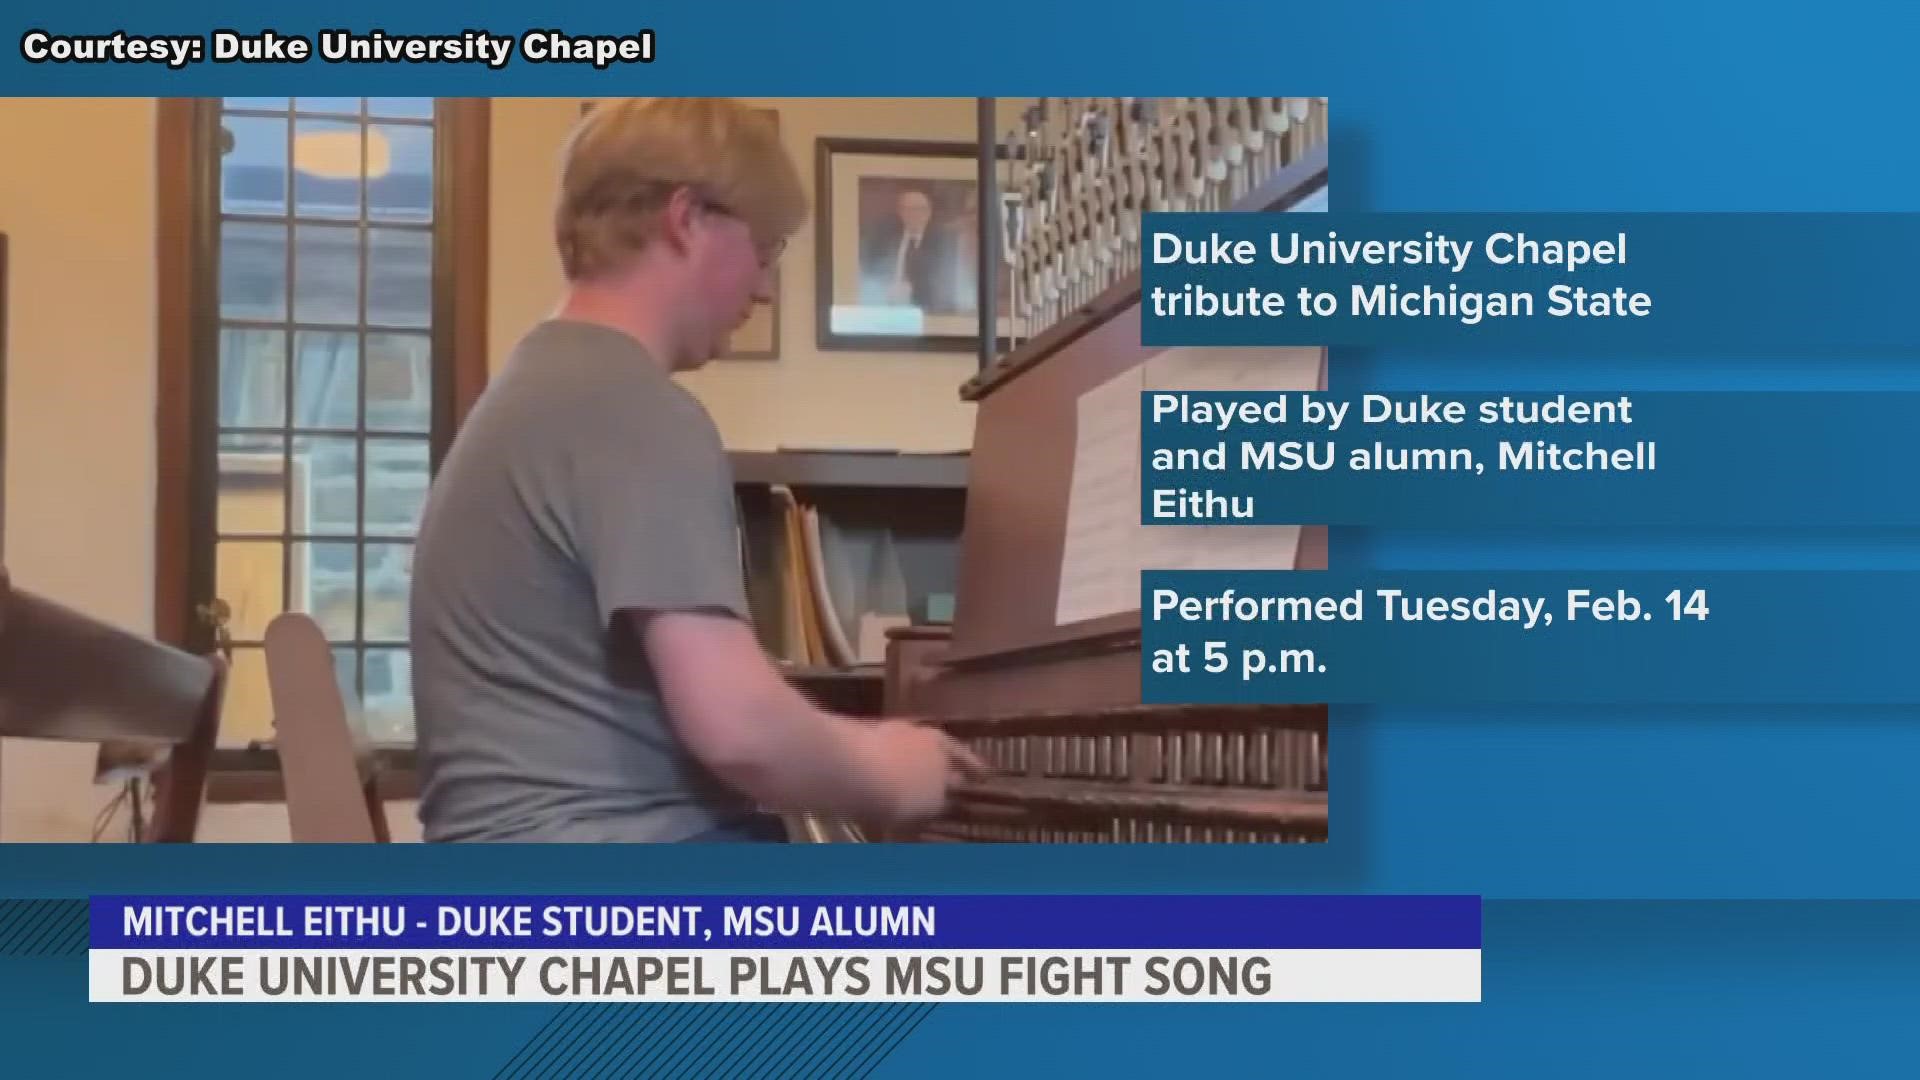 MSU alum and Duke Divinity School student, Mitchell Eithun performed the songs on the university chapel carillon Tuesday.